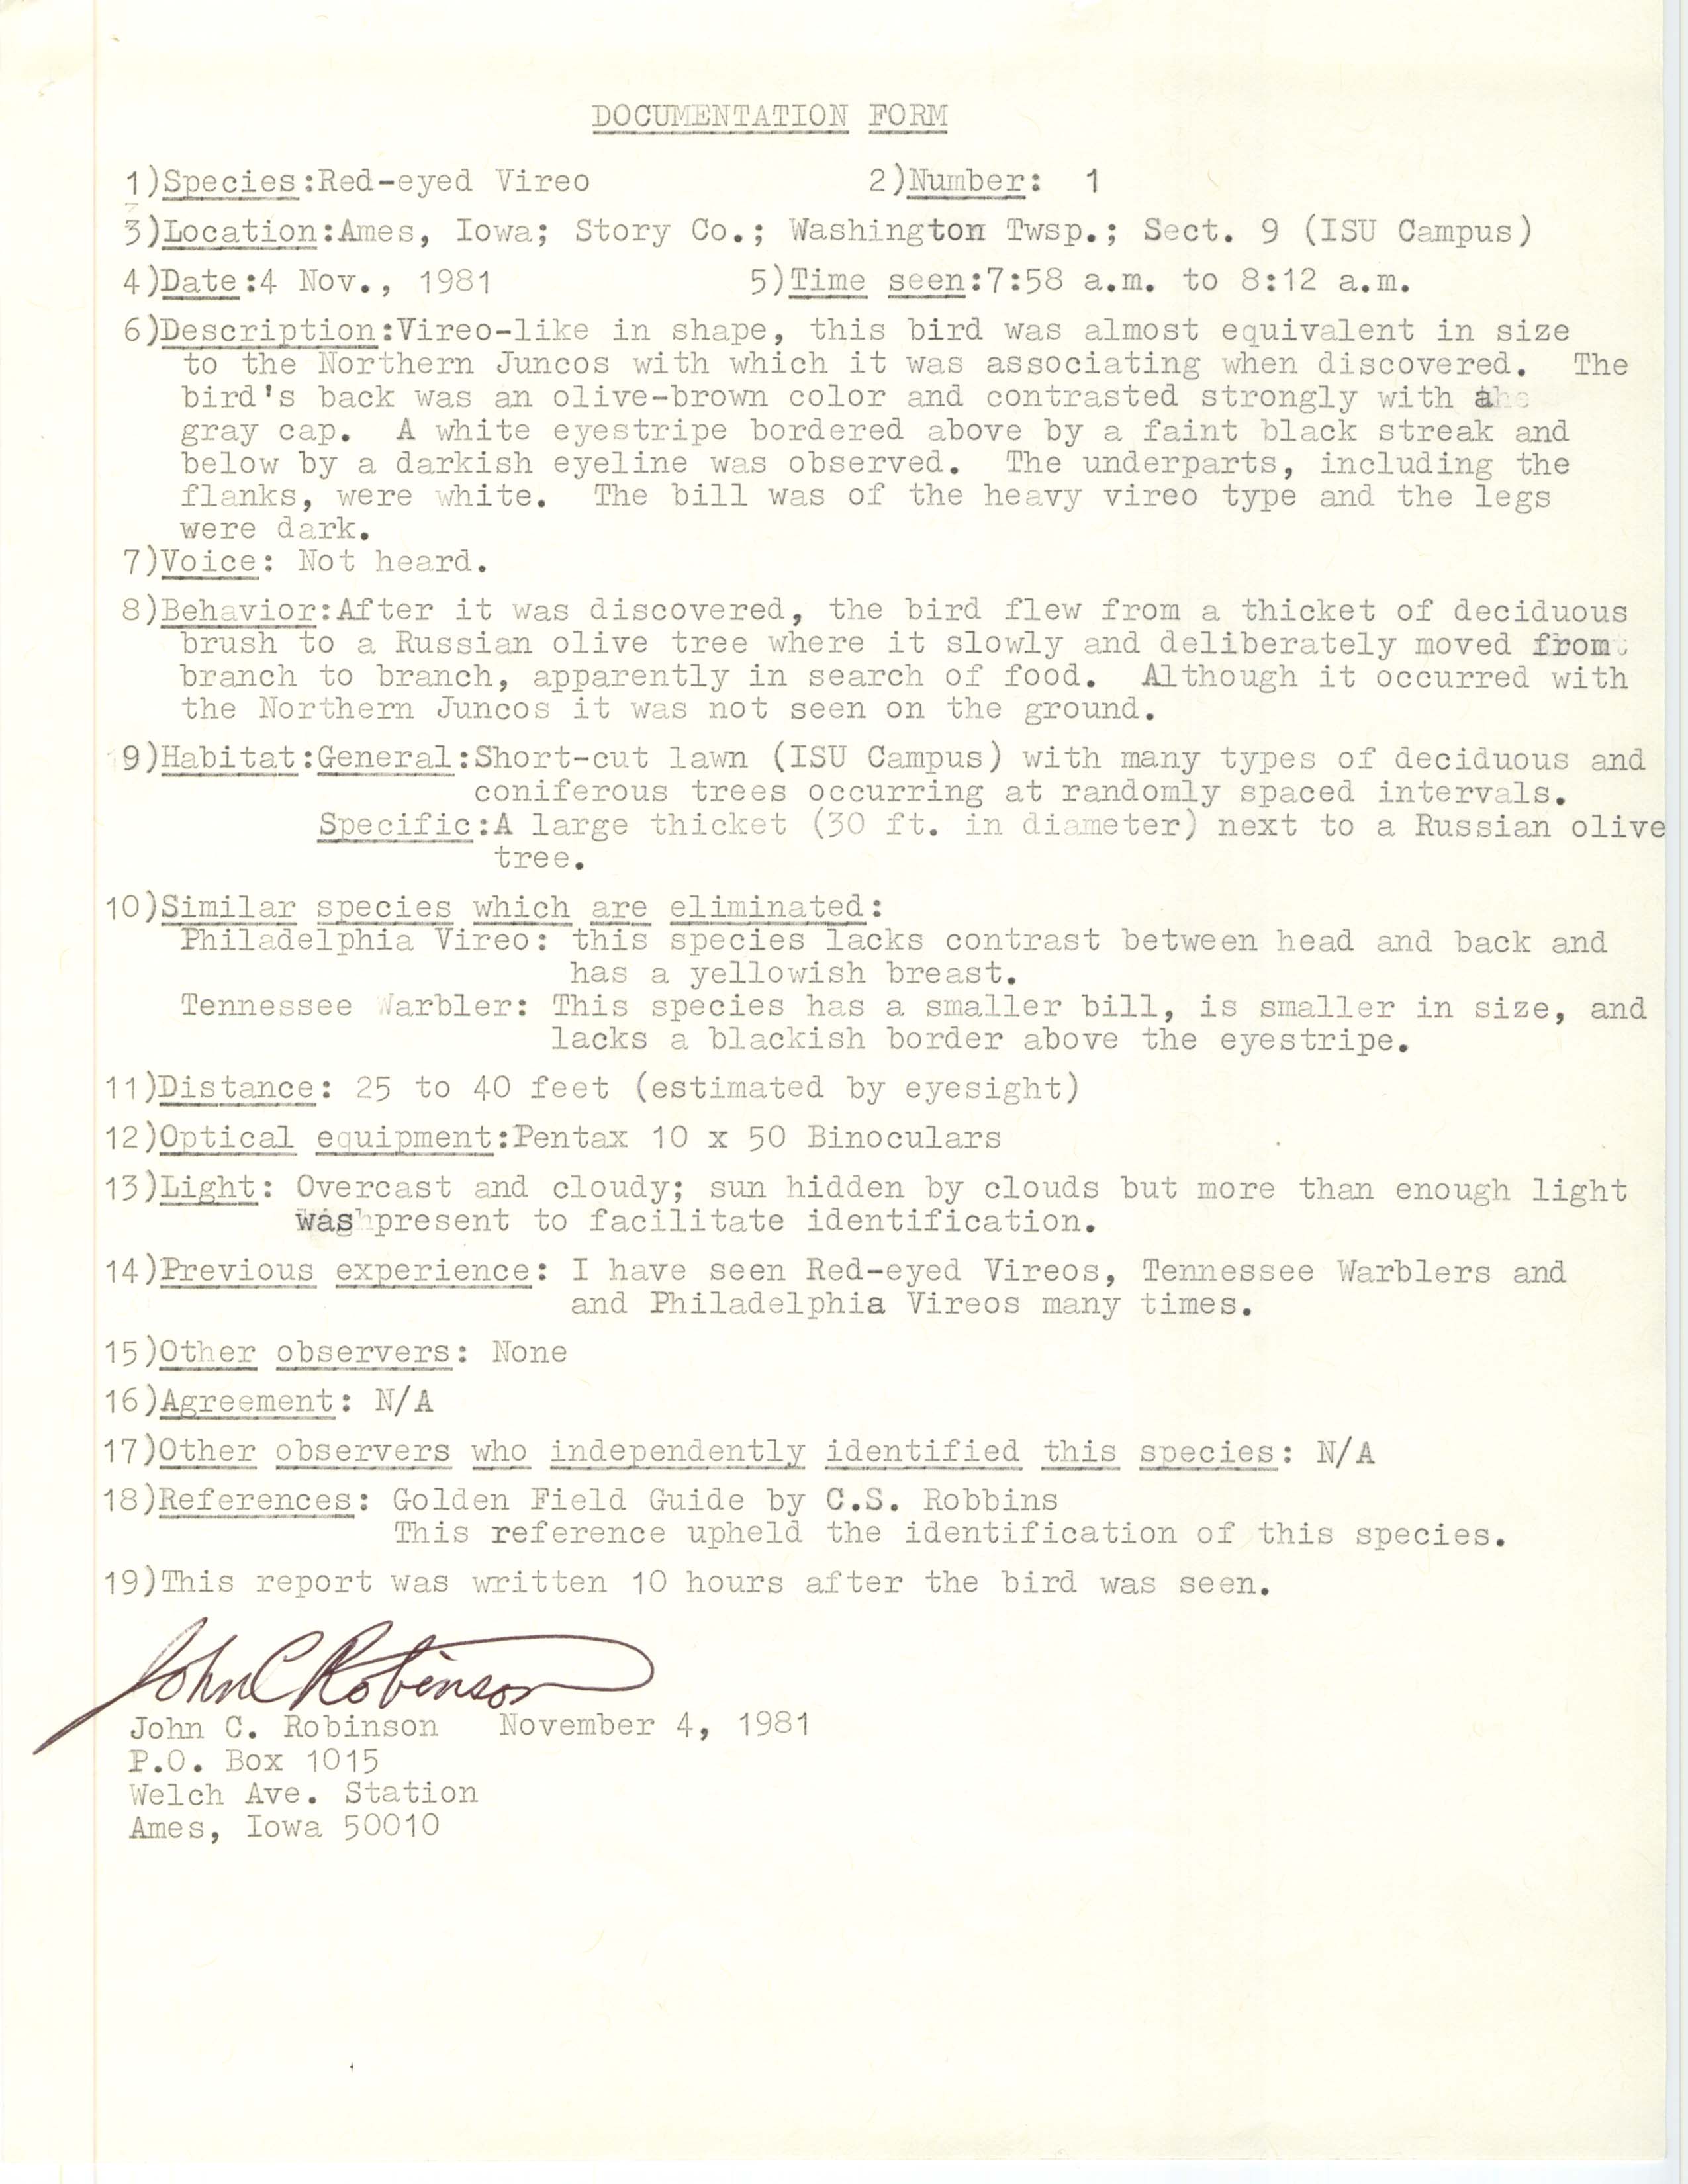 Rare bird documentation form for Red-eyed Vireo at Washington Township in Ames, 1981